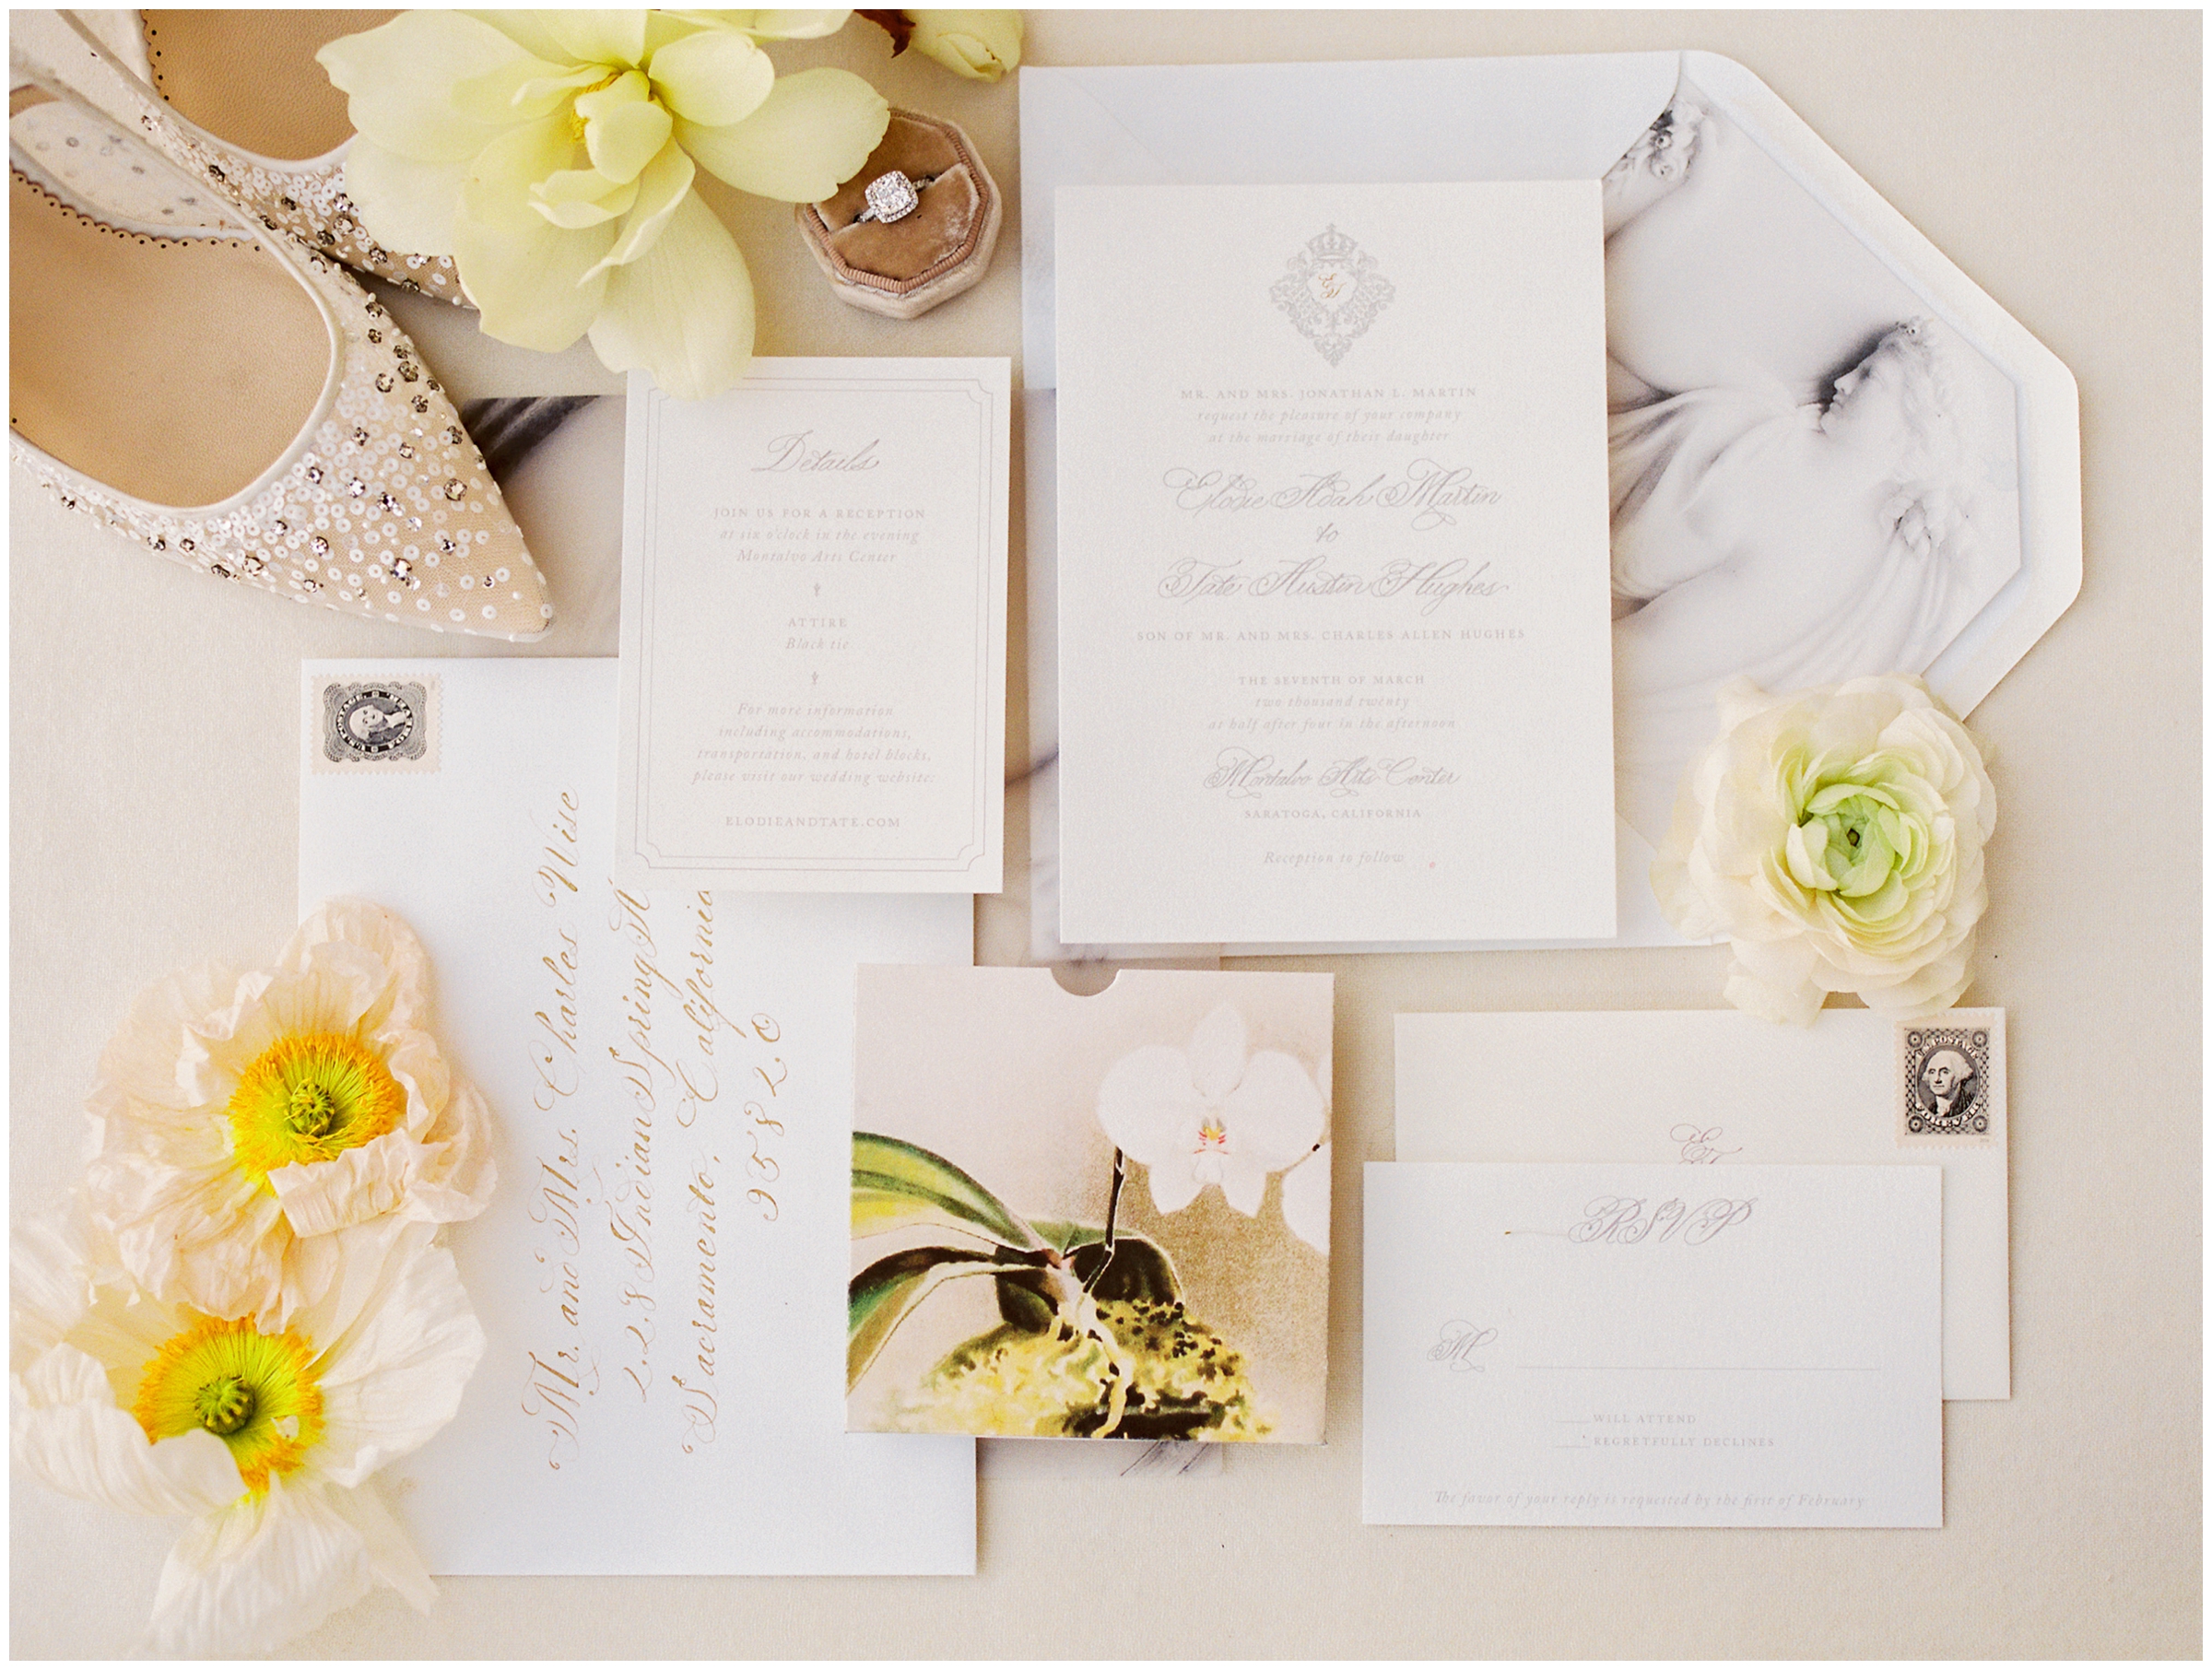 Wedding stationary by Kelsey Malie Calligraphy